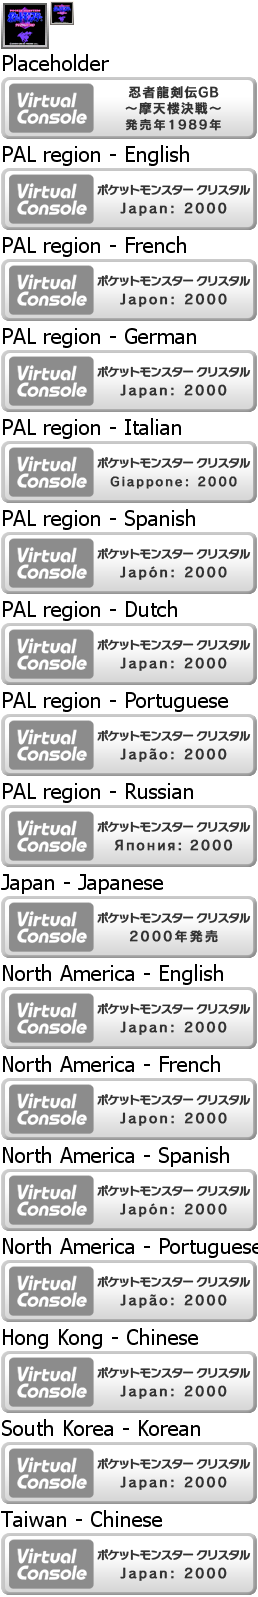 Virtual Console - Pocket Monsters Crystal